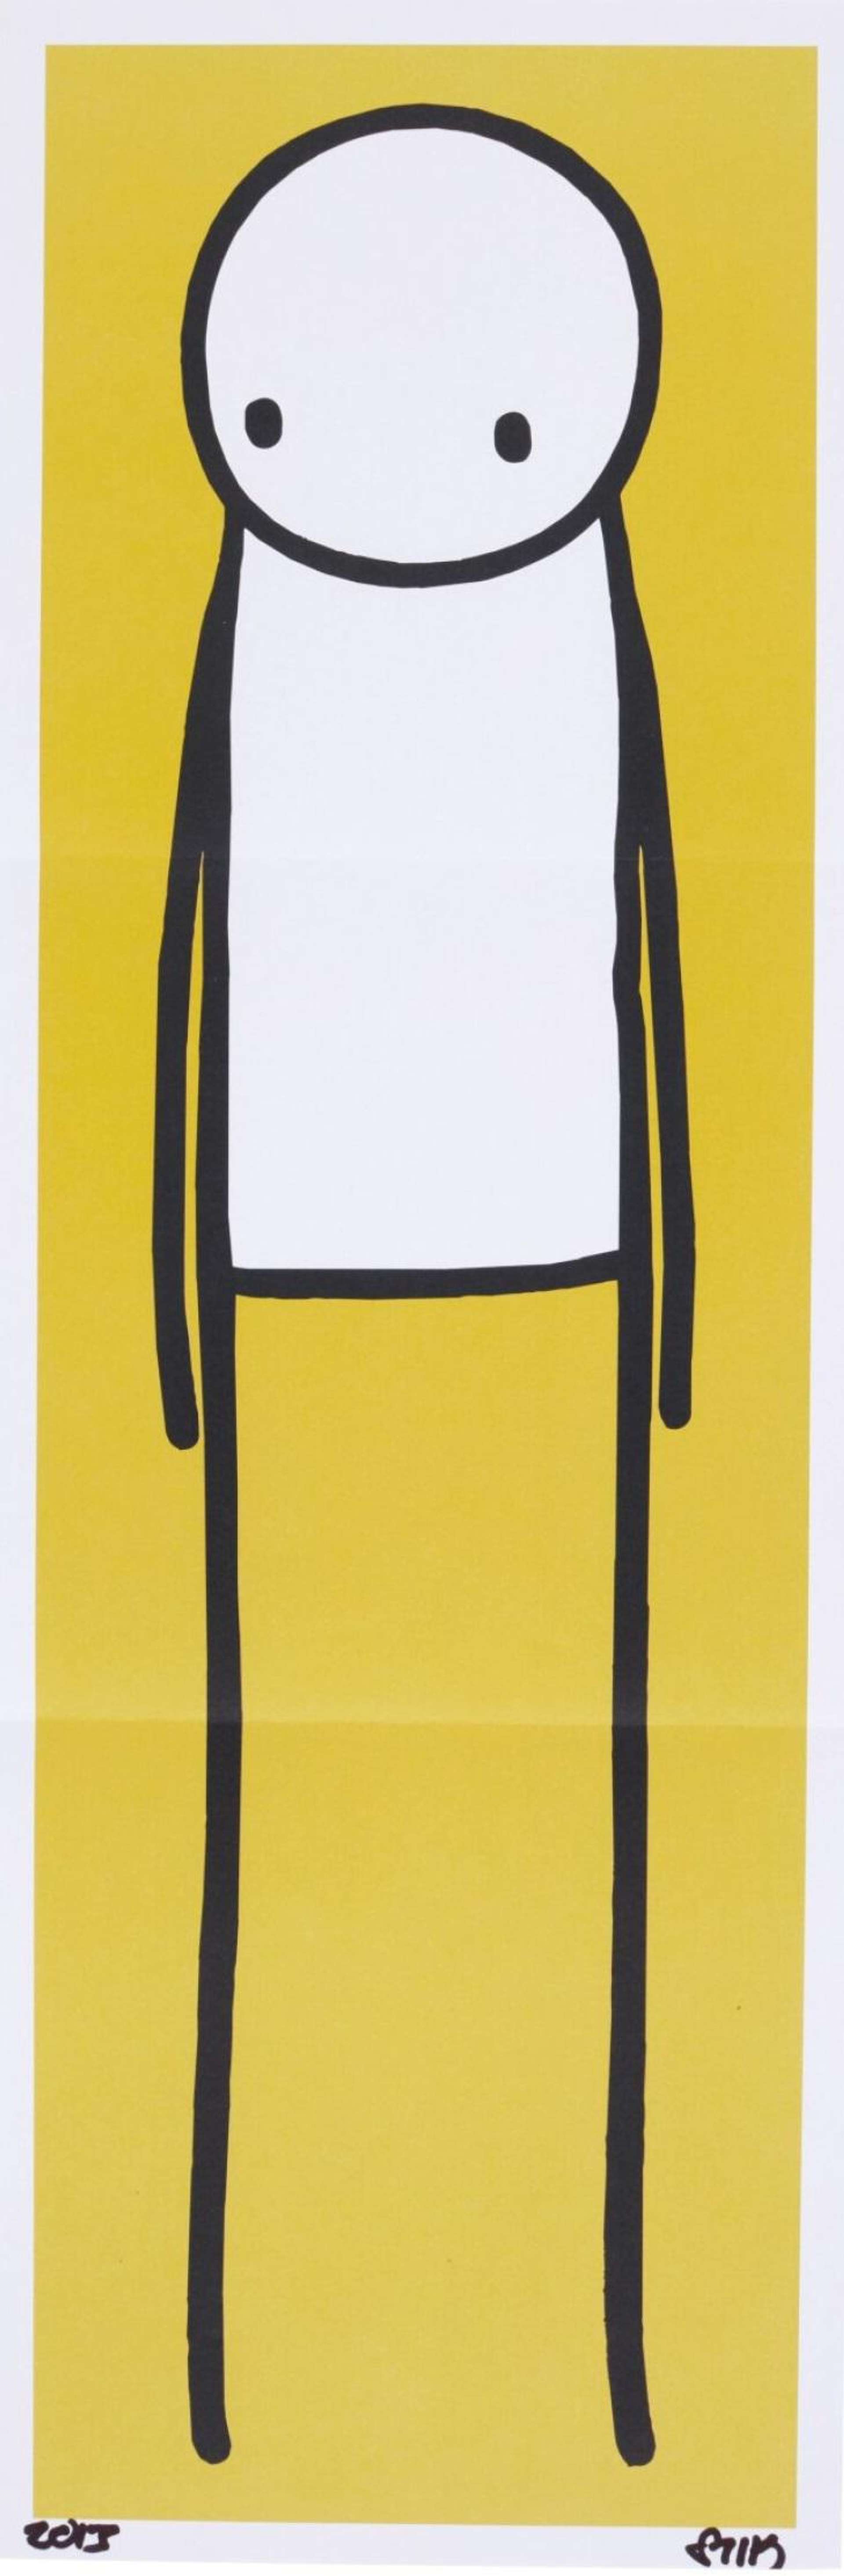 The Big Issue (yellow) by Stik